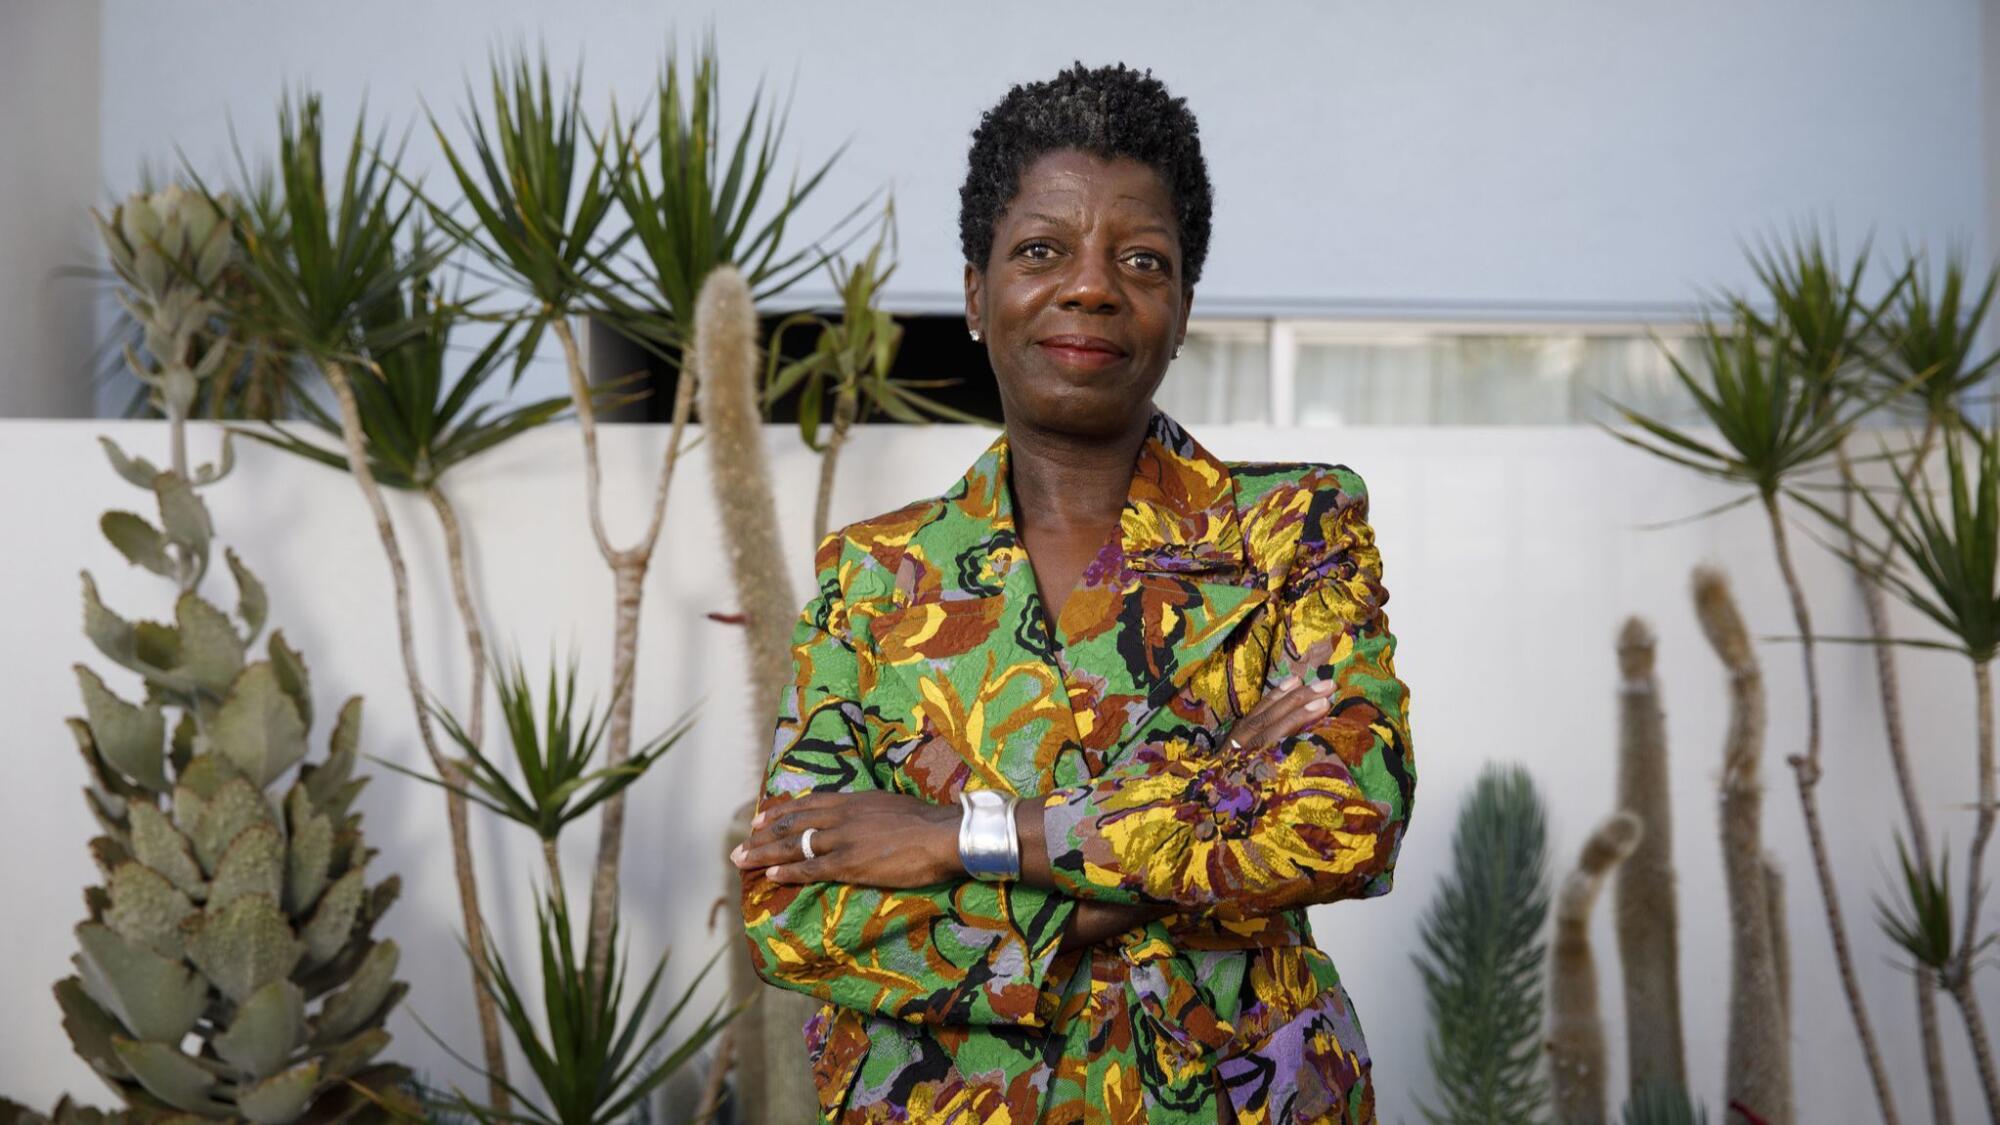 Thelma Golden, director of Harlem's Studio Museum, at The Standard hotel in West Hollywood, on Sept 21, 2018.